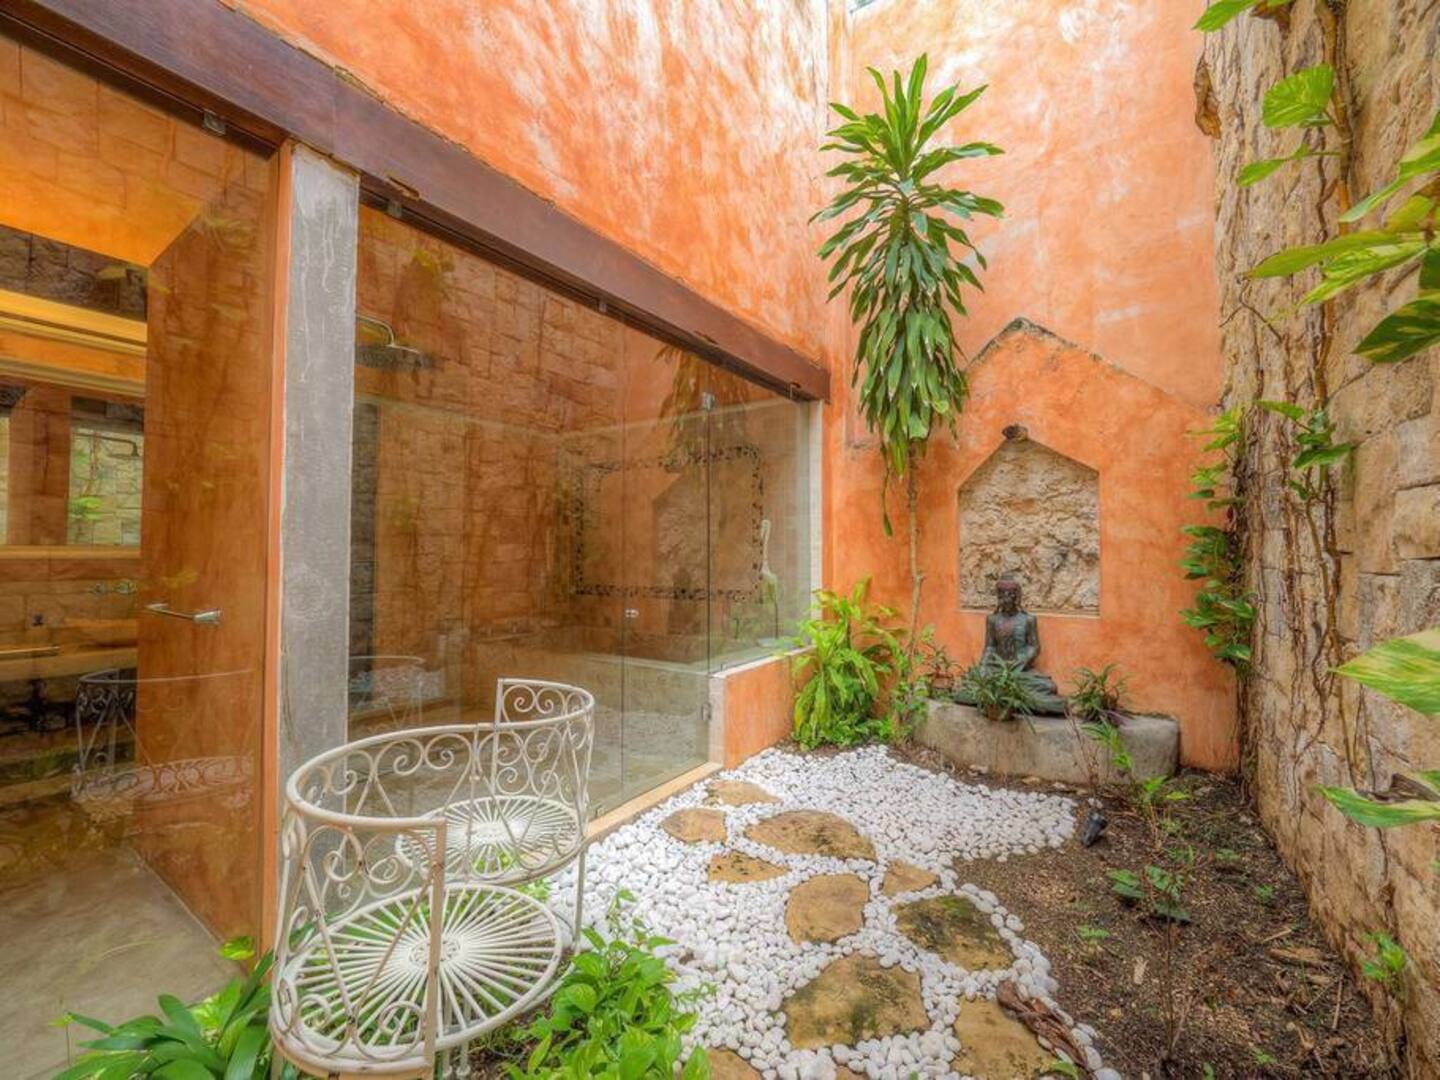 picture of an orange patio, with a metal chair, hanging plants and a statue